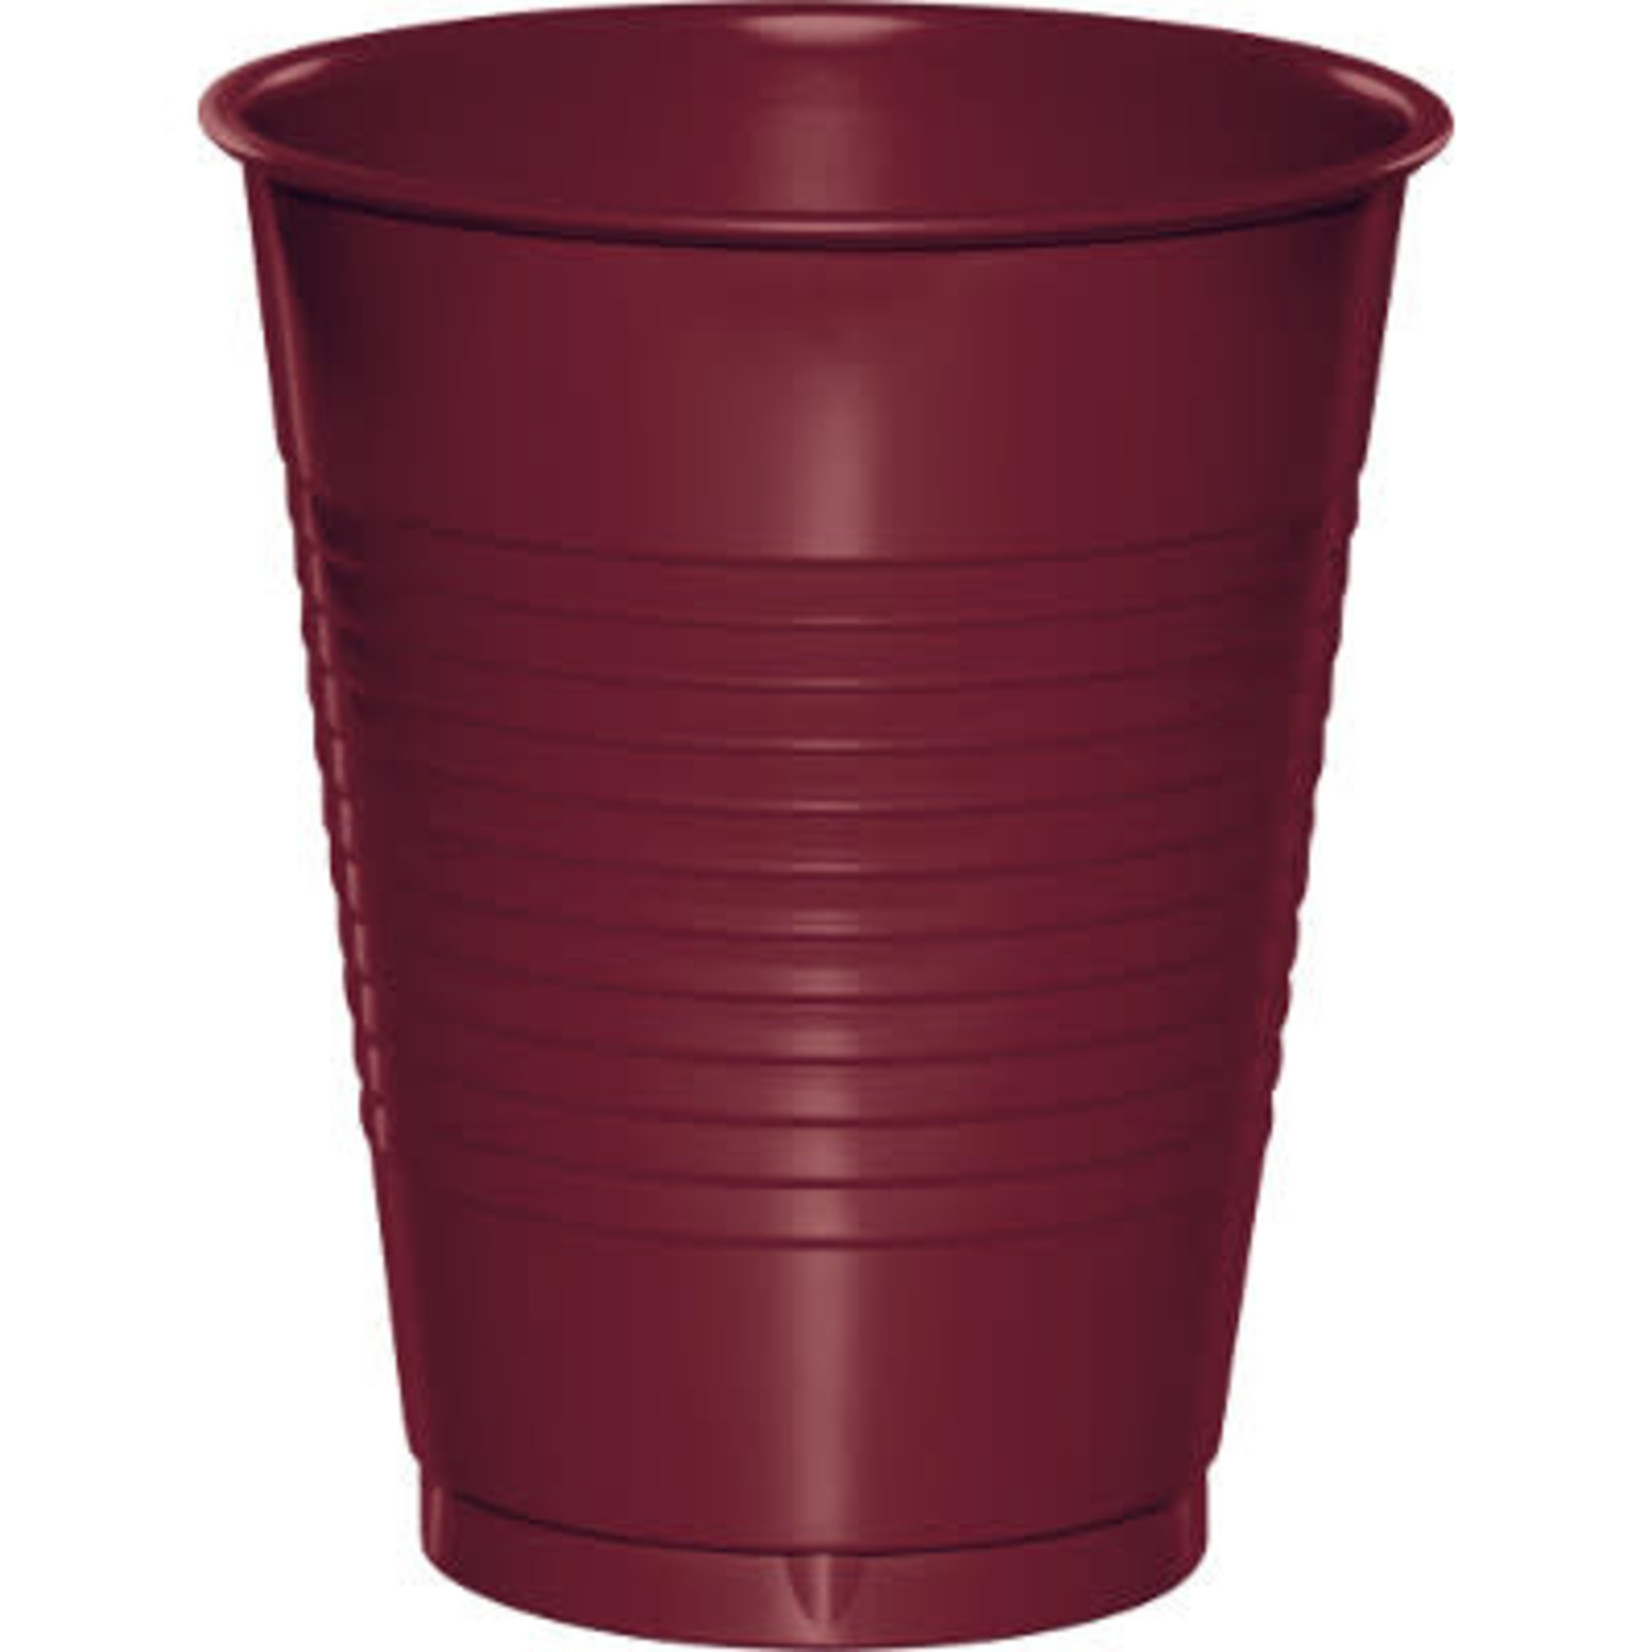 16oz BURGUNDY RED PLASTIC CUPS - Party Adventure